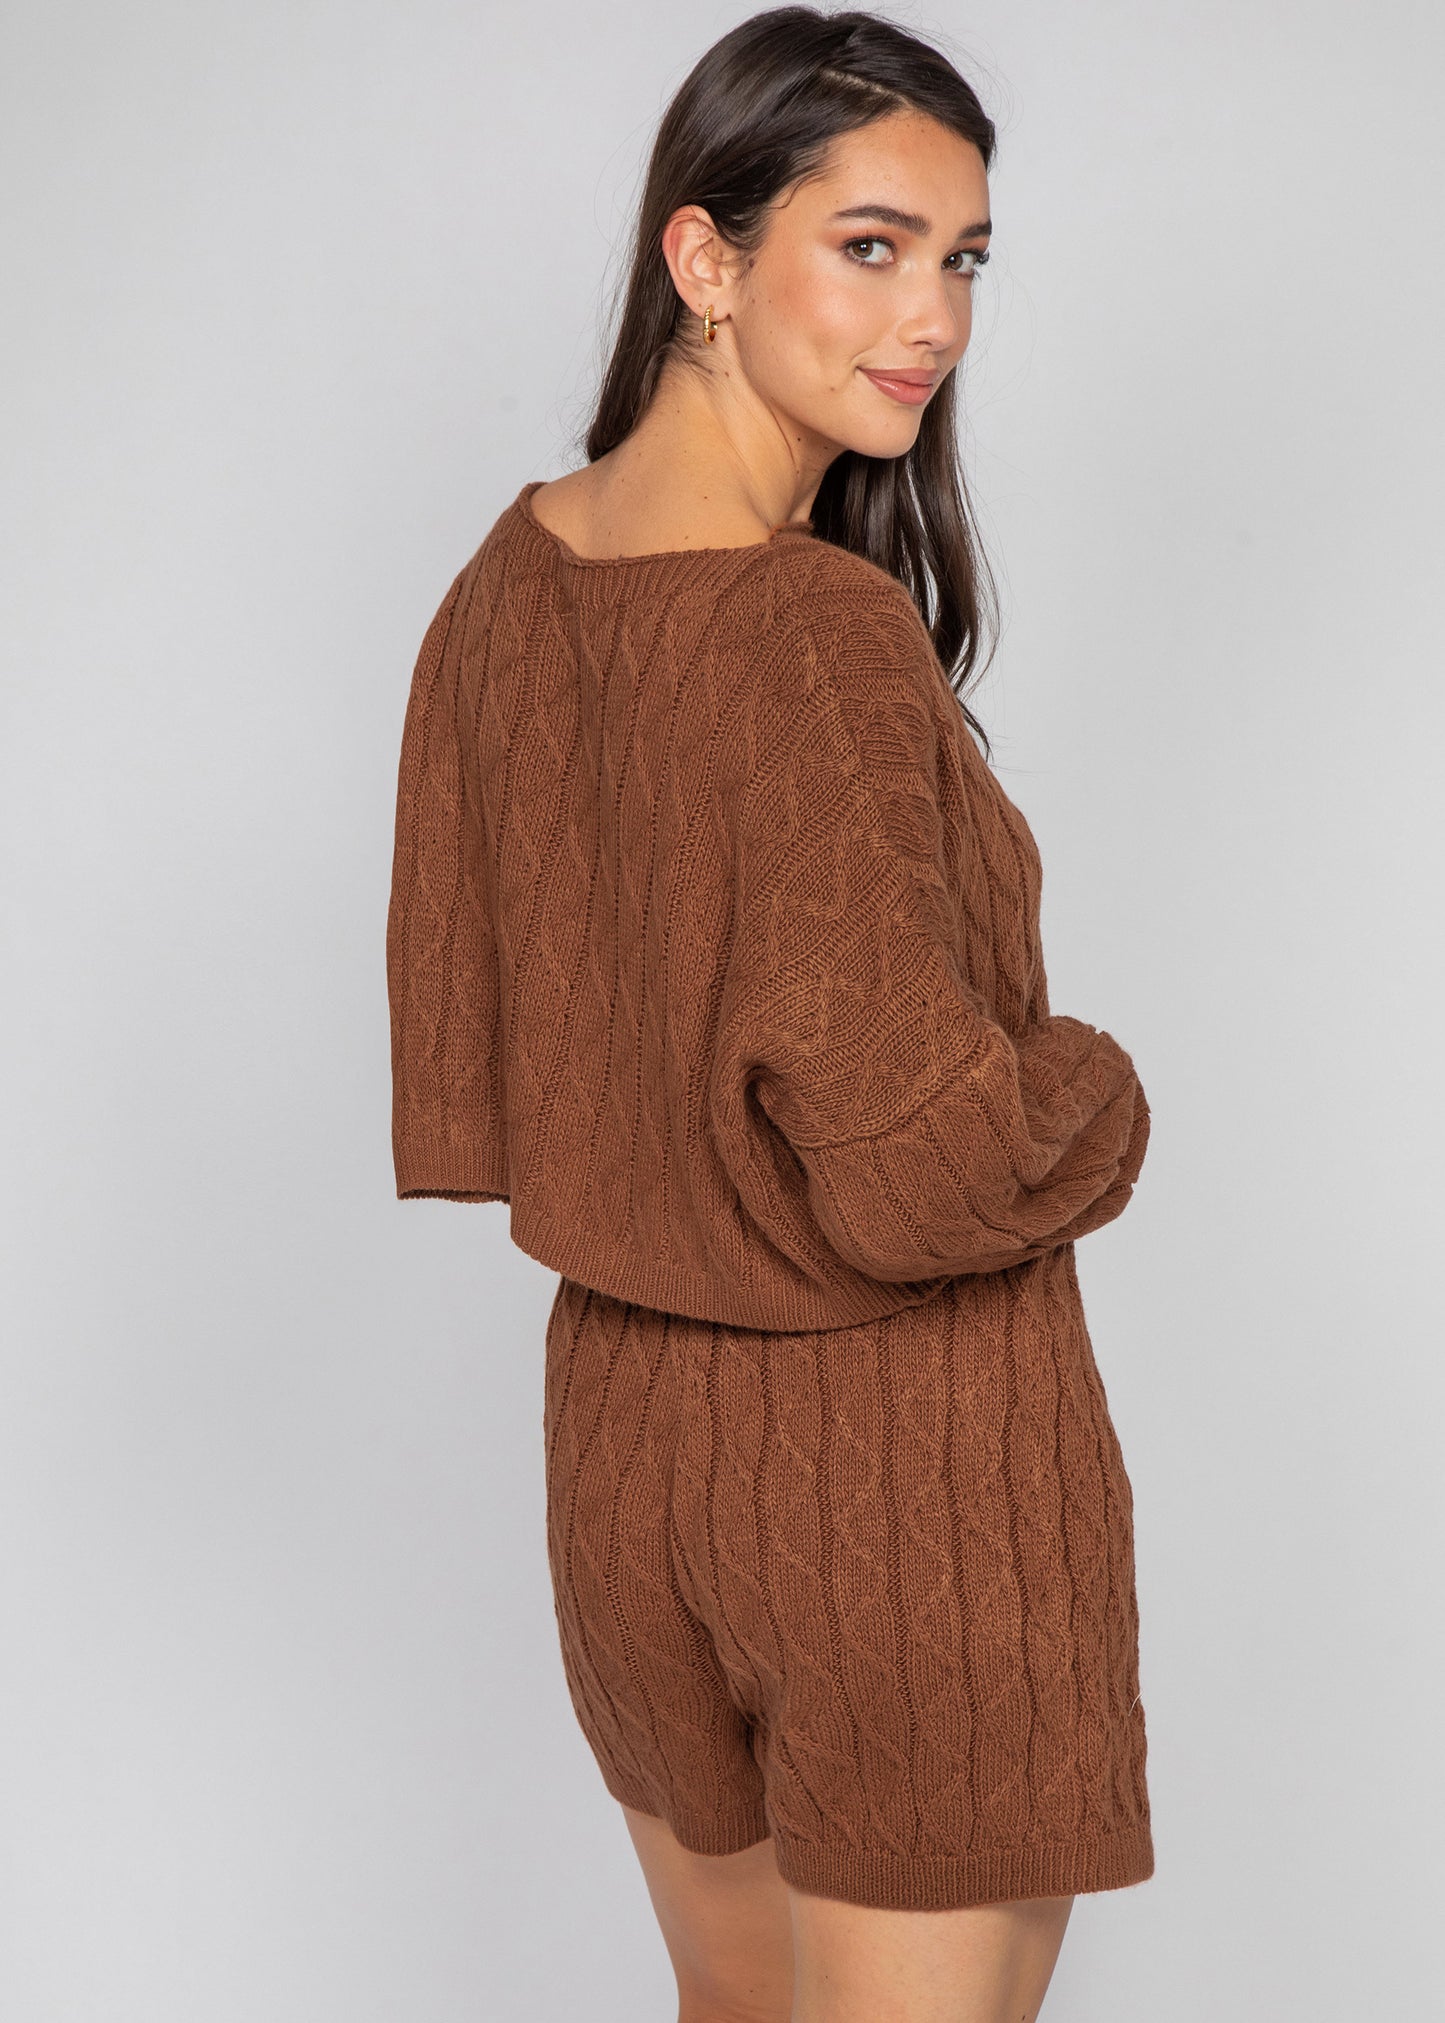 Cable knit jumper and shorts co-ord in brown